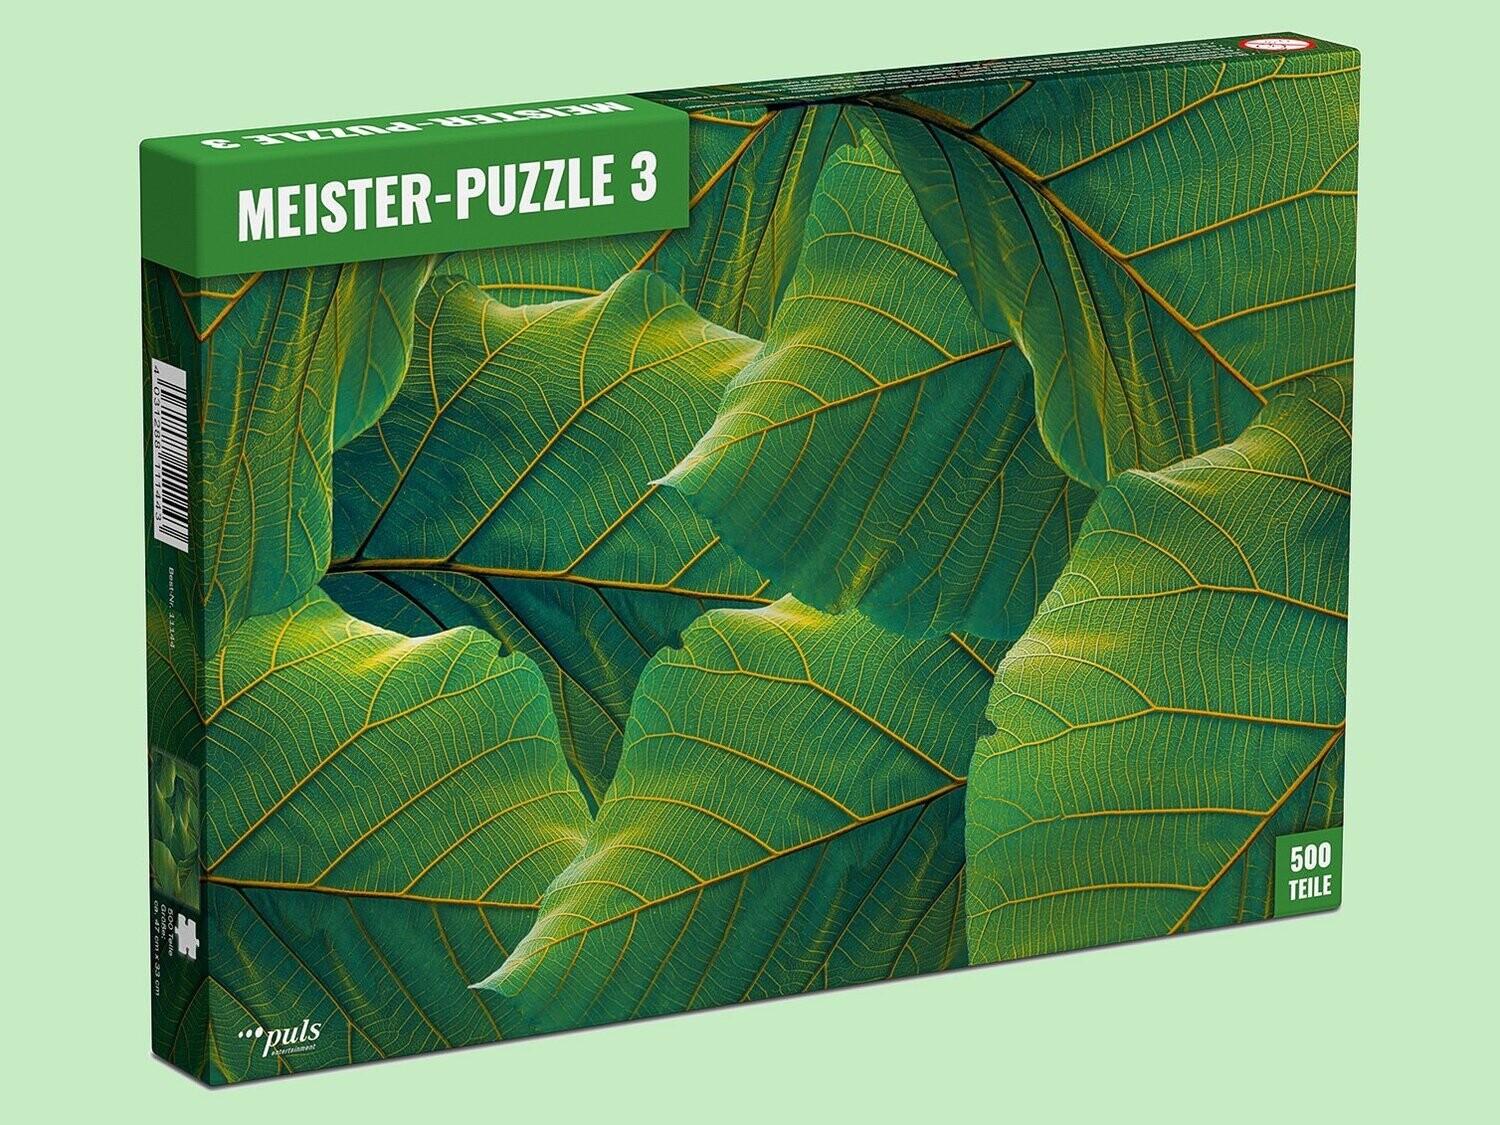 Meister-Puzzle 3